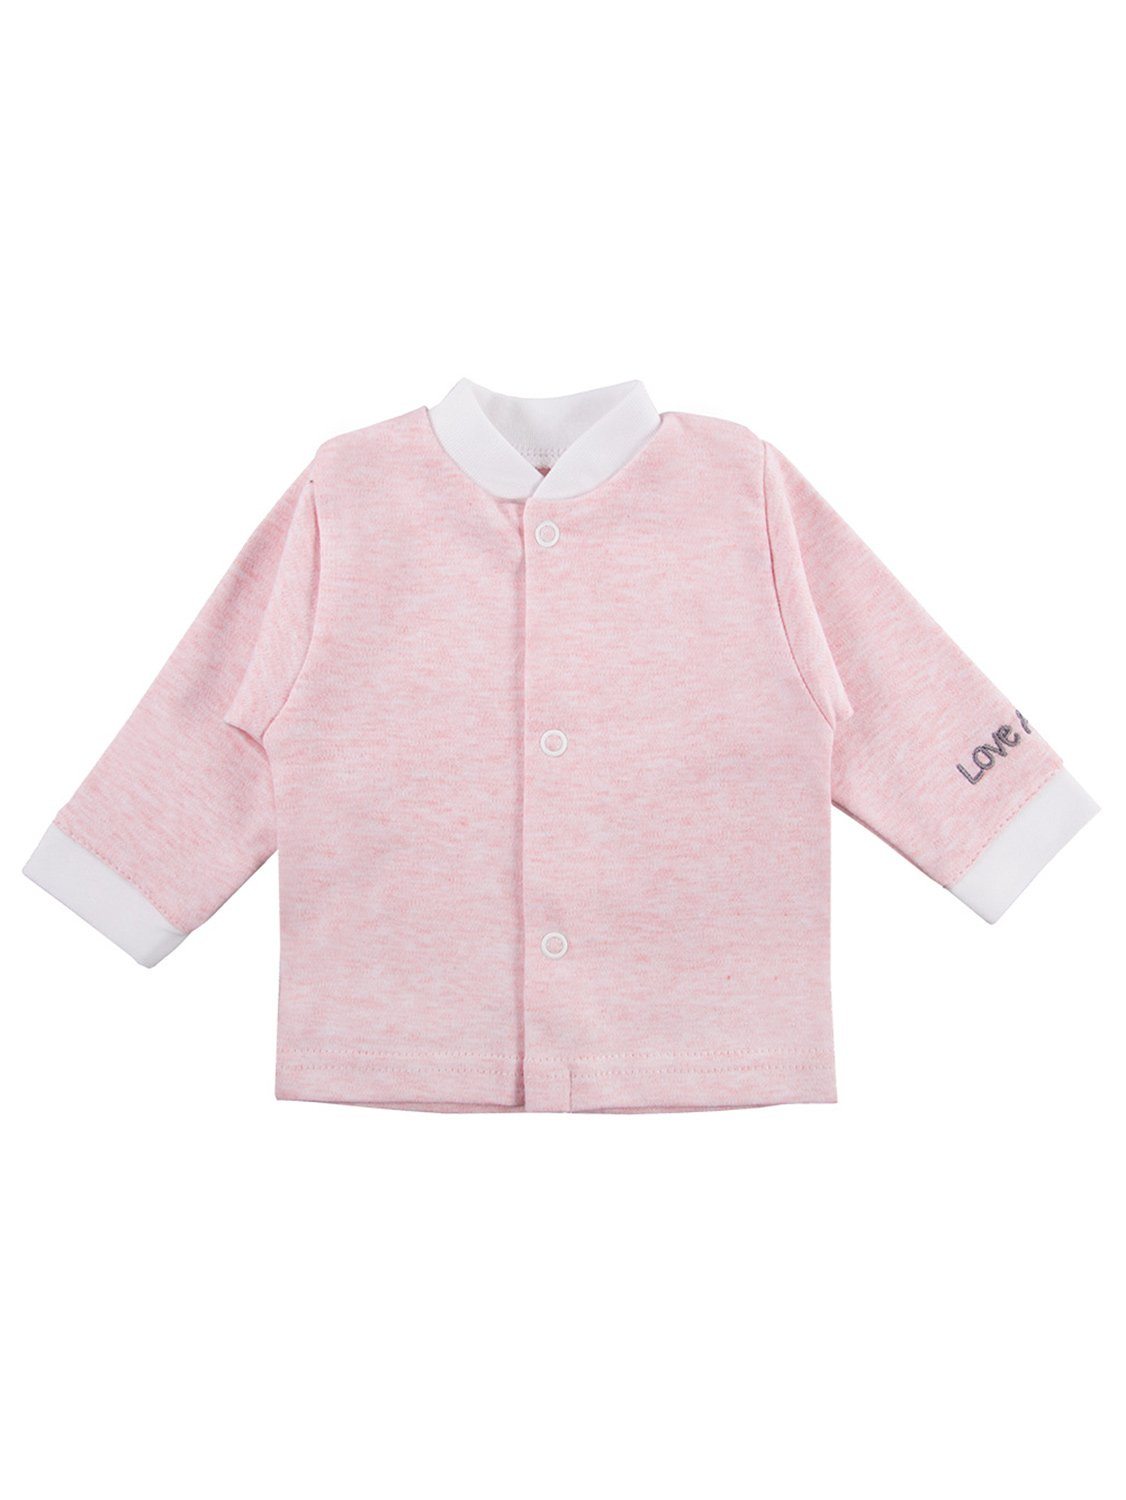 Early Baby Long Sleeved Top, "Love Alpaca" Embroidery - Pink Top / T-shirt EEVI 